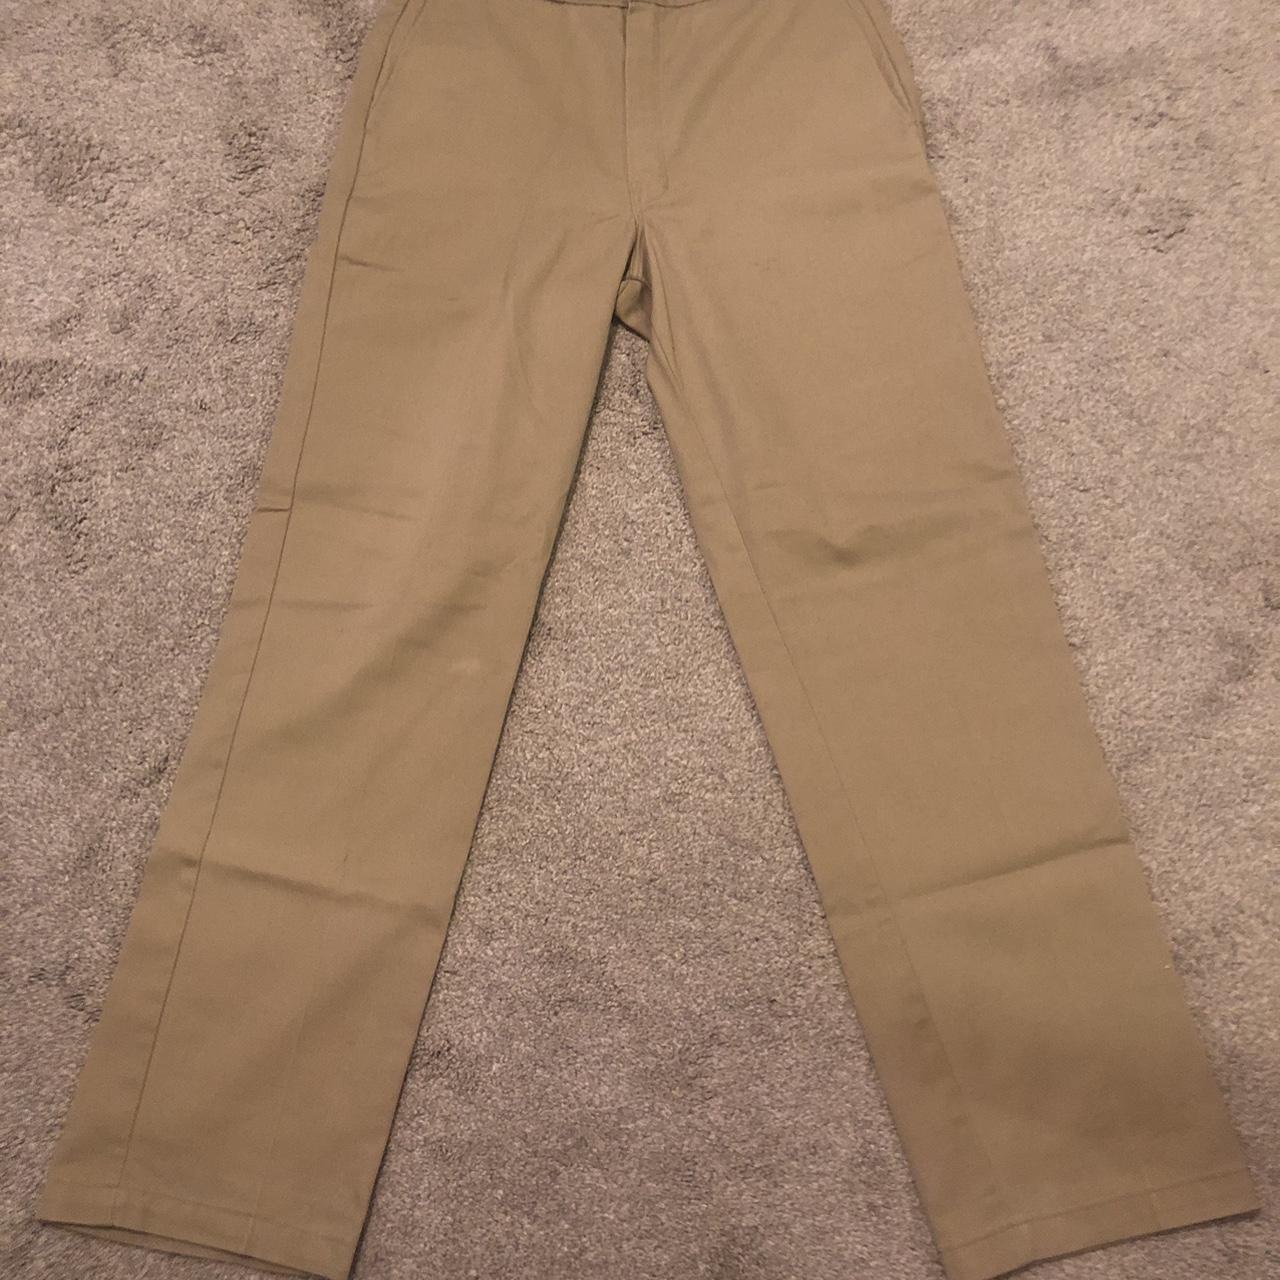 Buy the Mens Dress Pants Size 32x34  GoodwillFinds